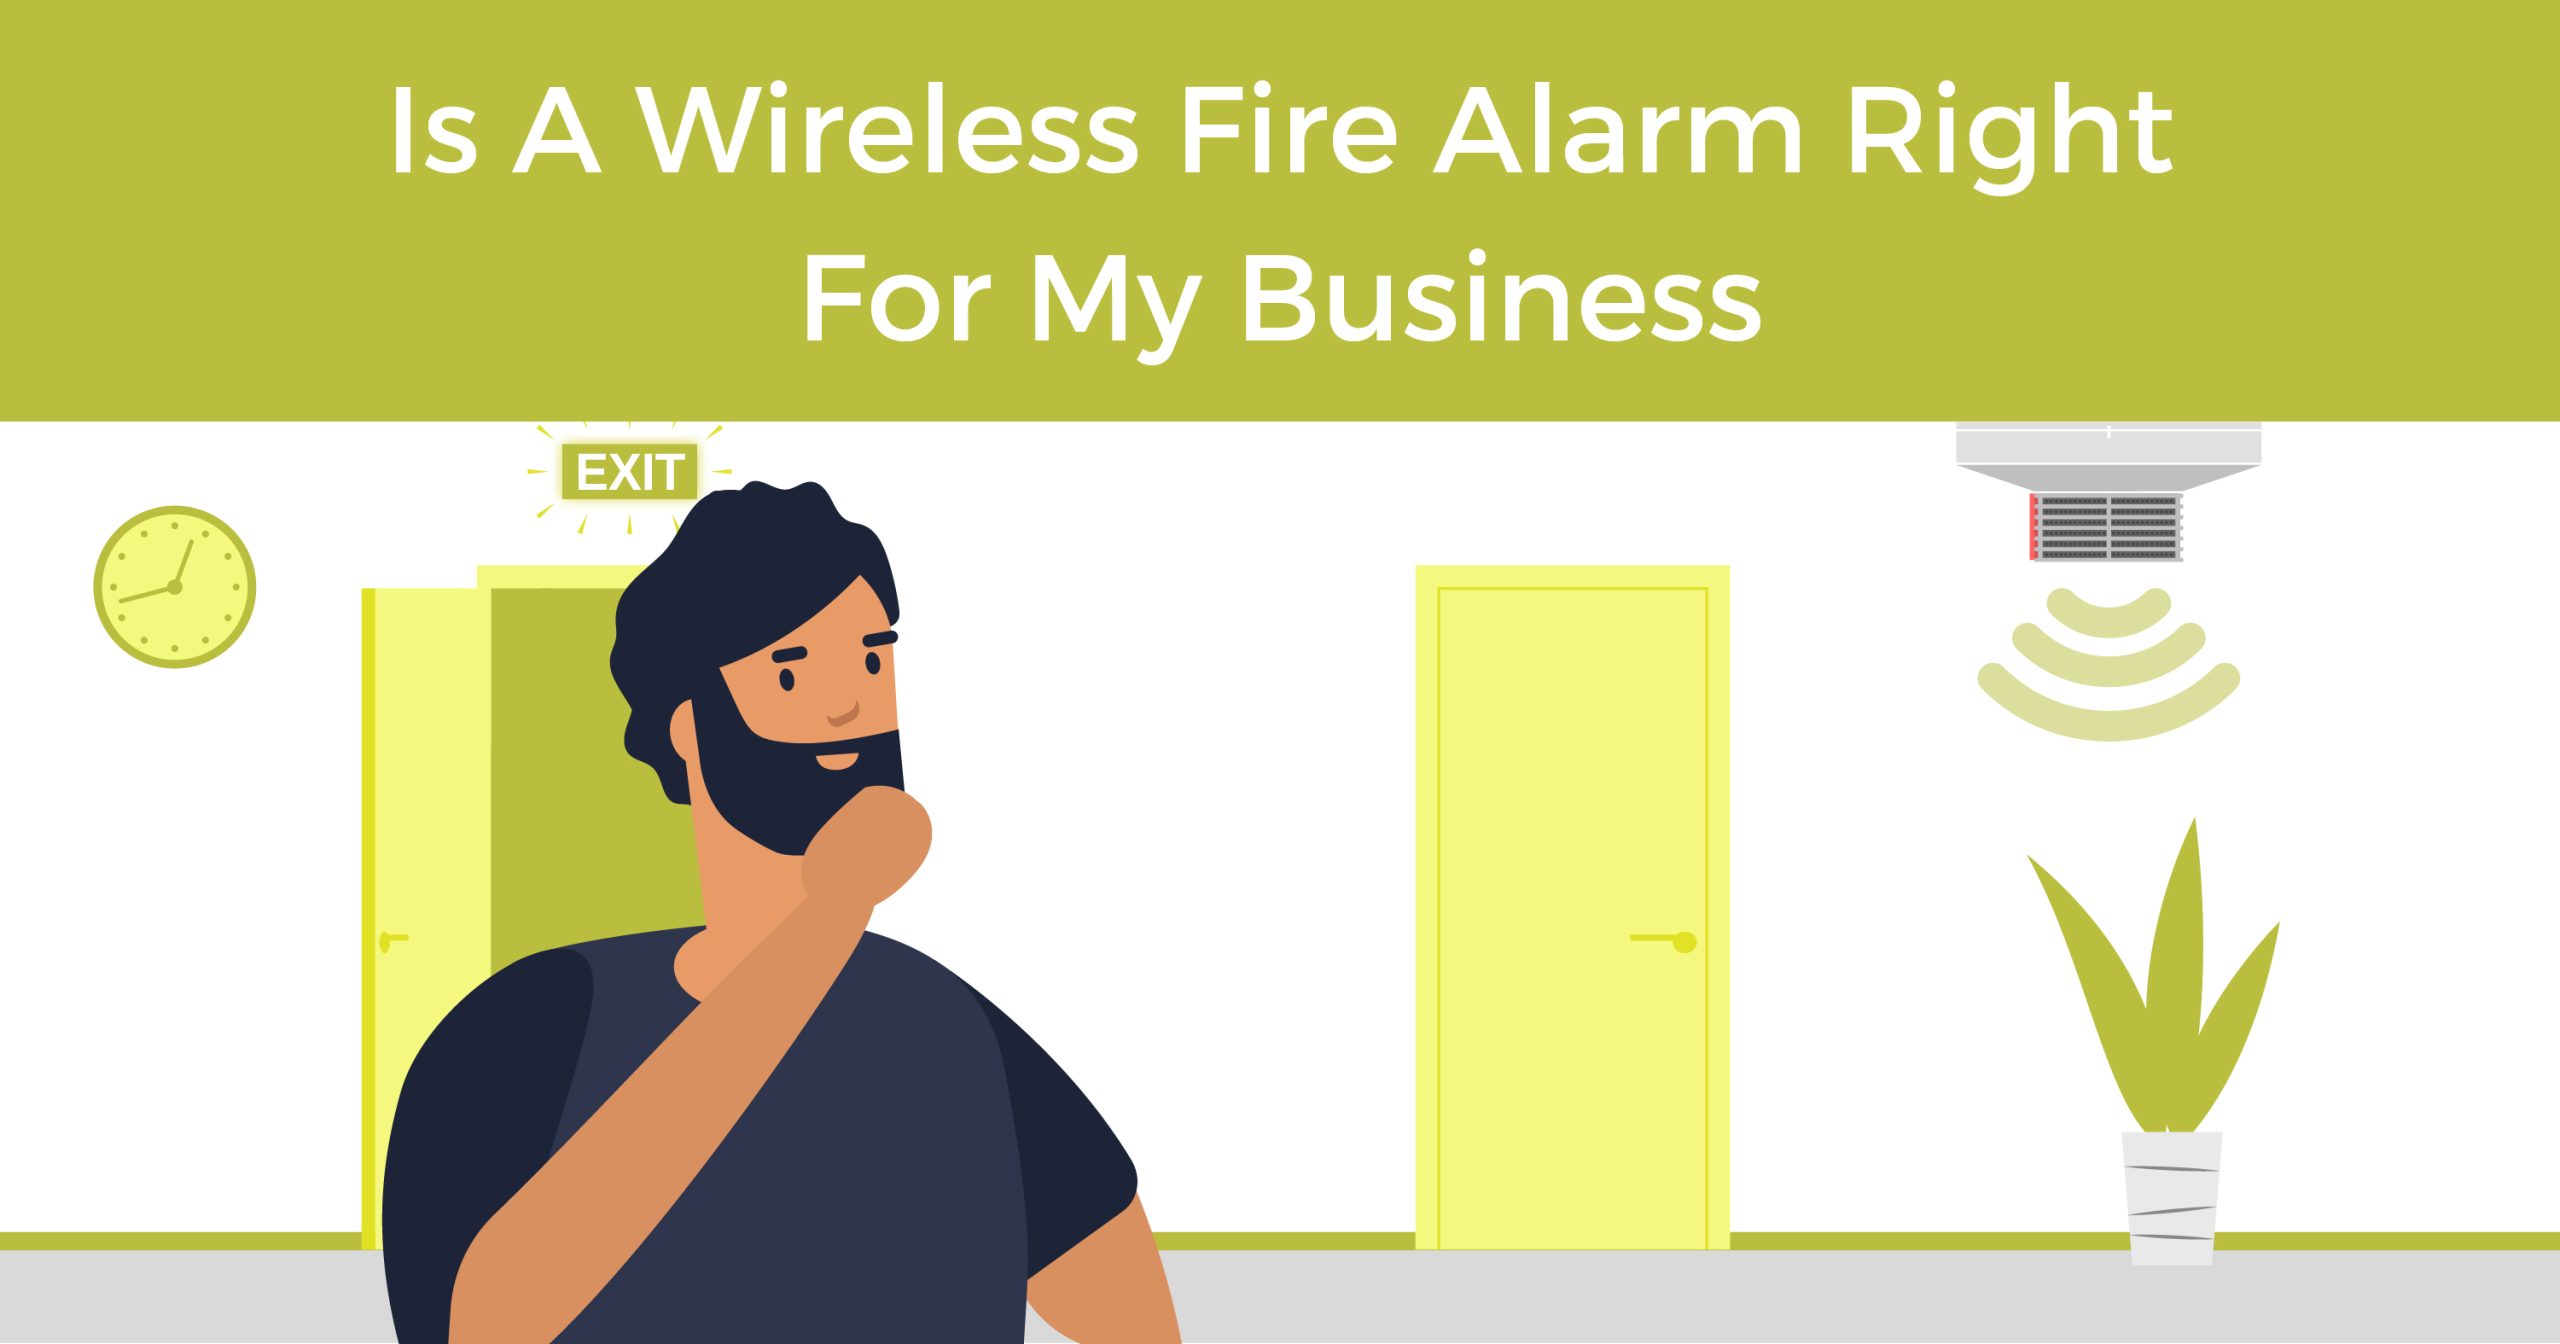 Is a wireless fire alarm right for my business?